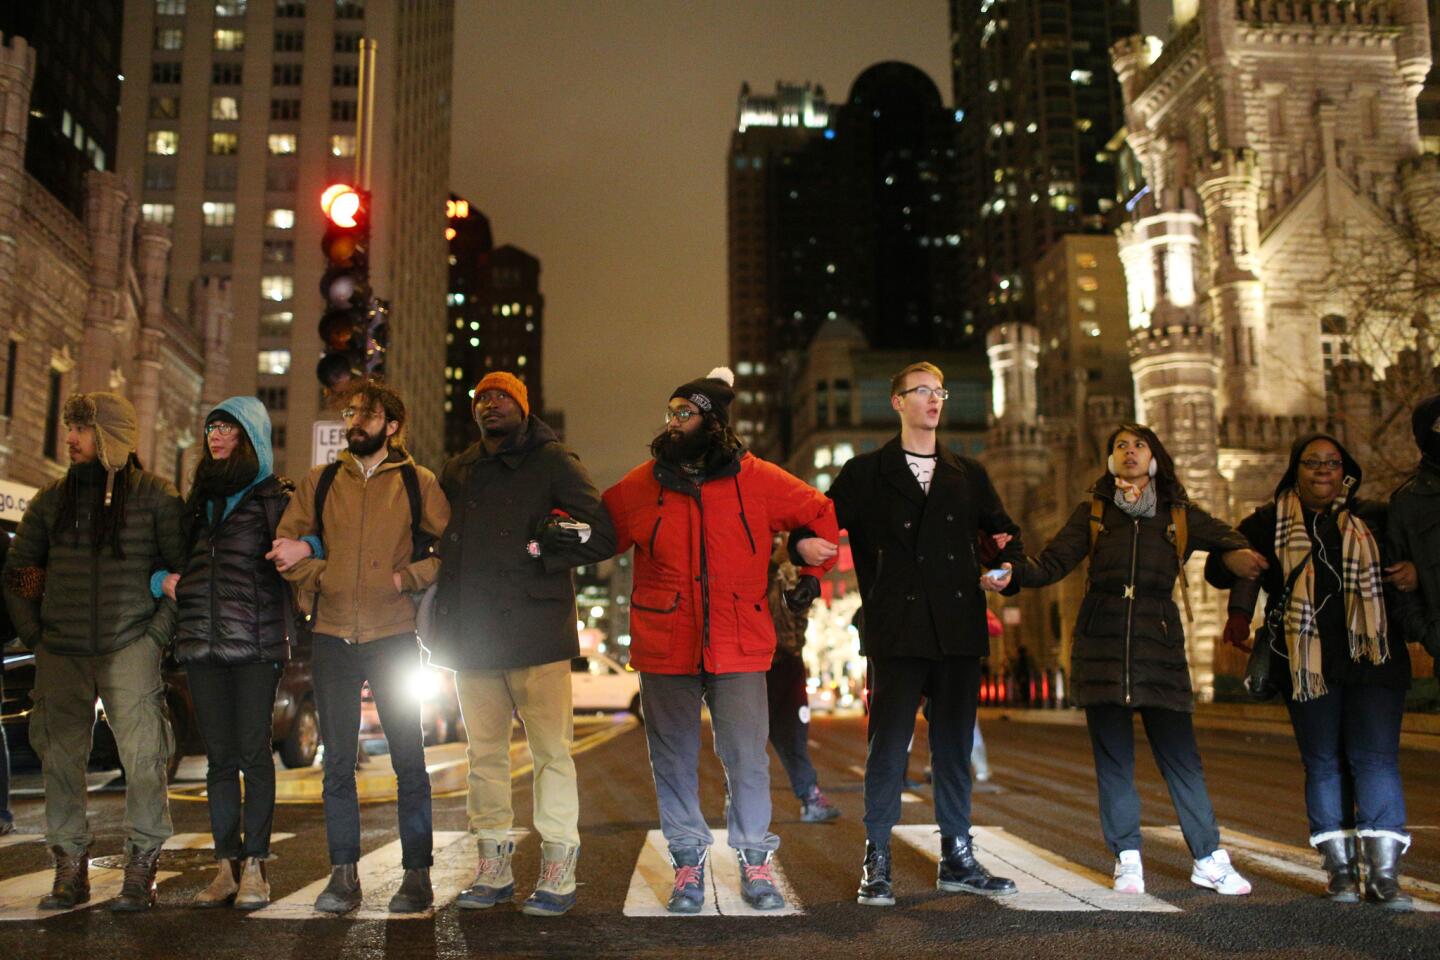 Protesters link arms to block North Michigan Avenue and show support for police shooting victim Laquan McDonald on Nov. 27, 2015, in Chicago.